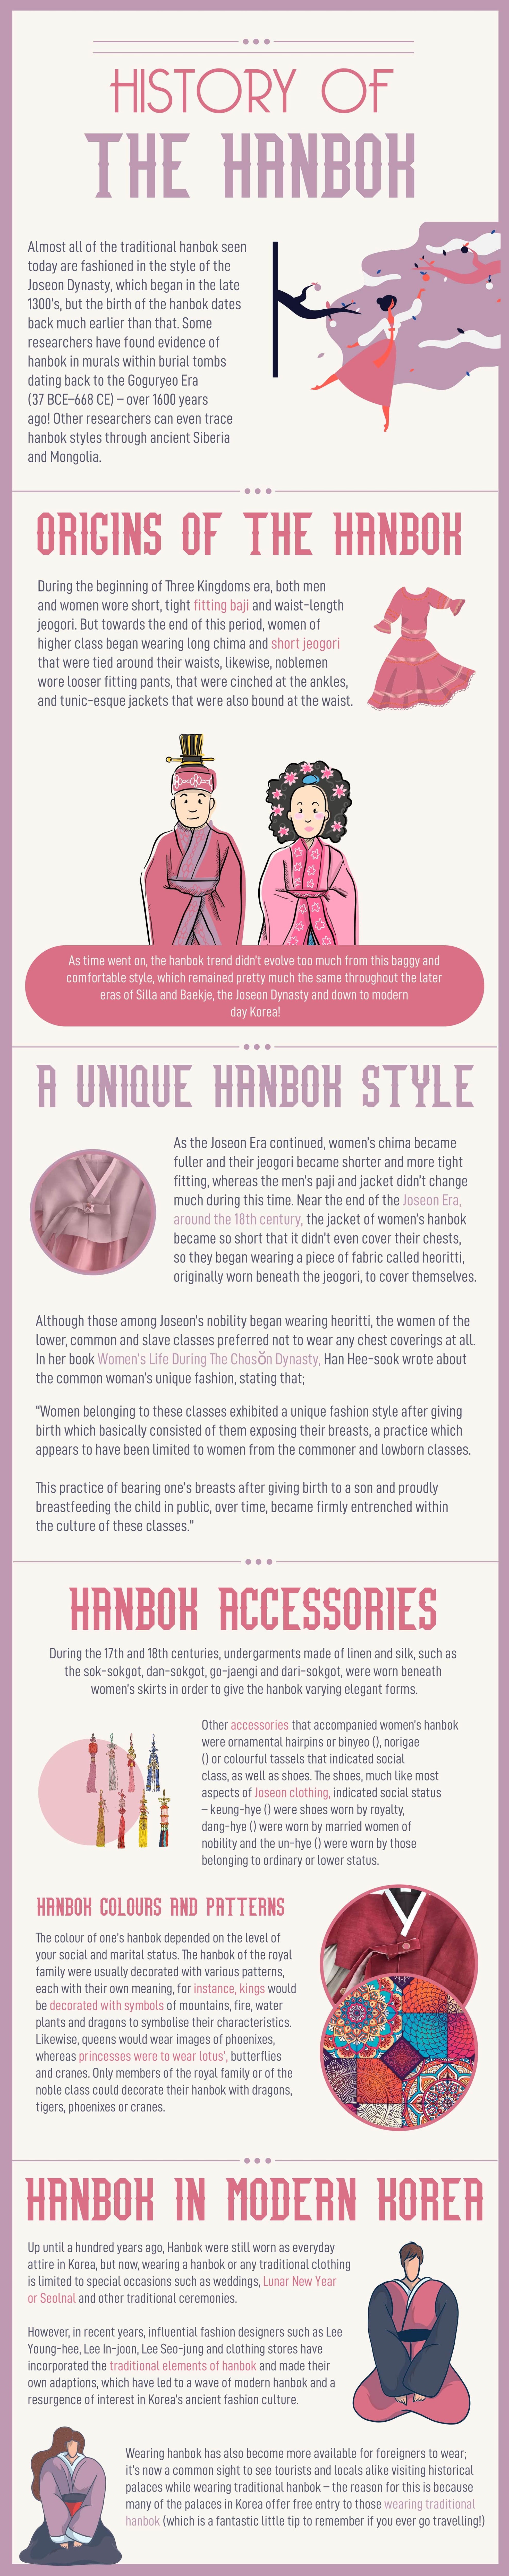 Infographic on the history of hanbok and Korean culture and society 